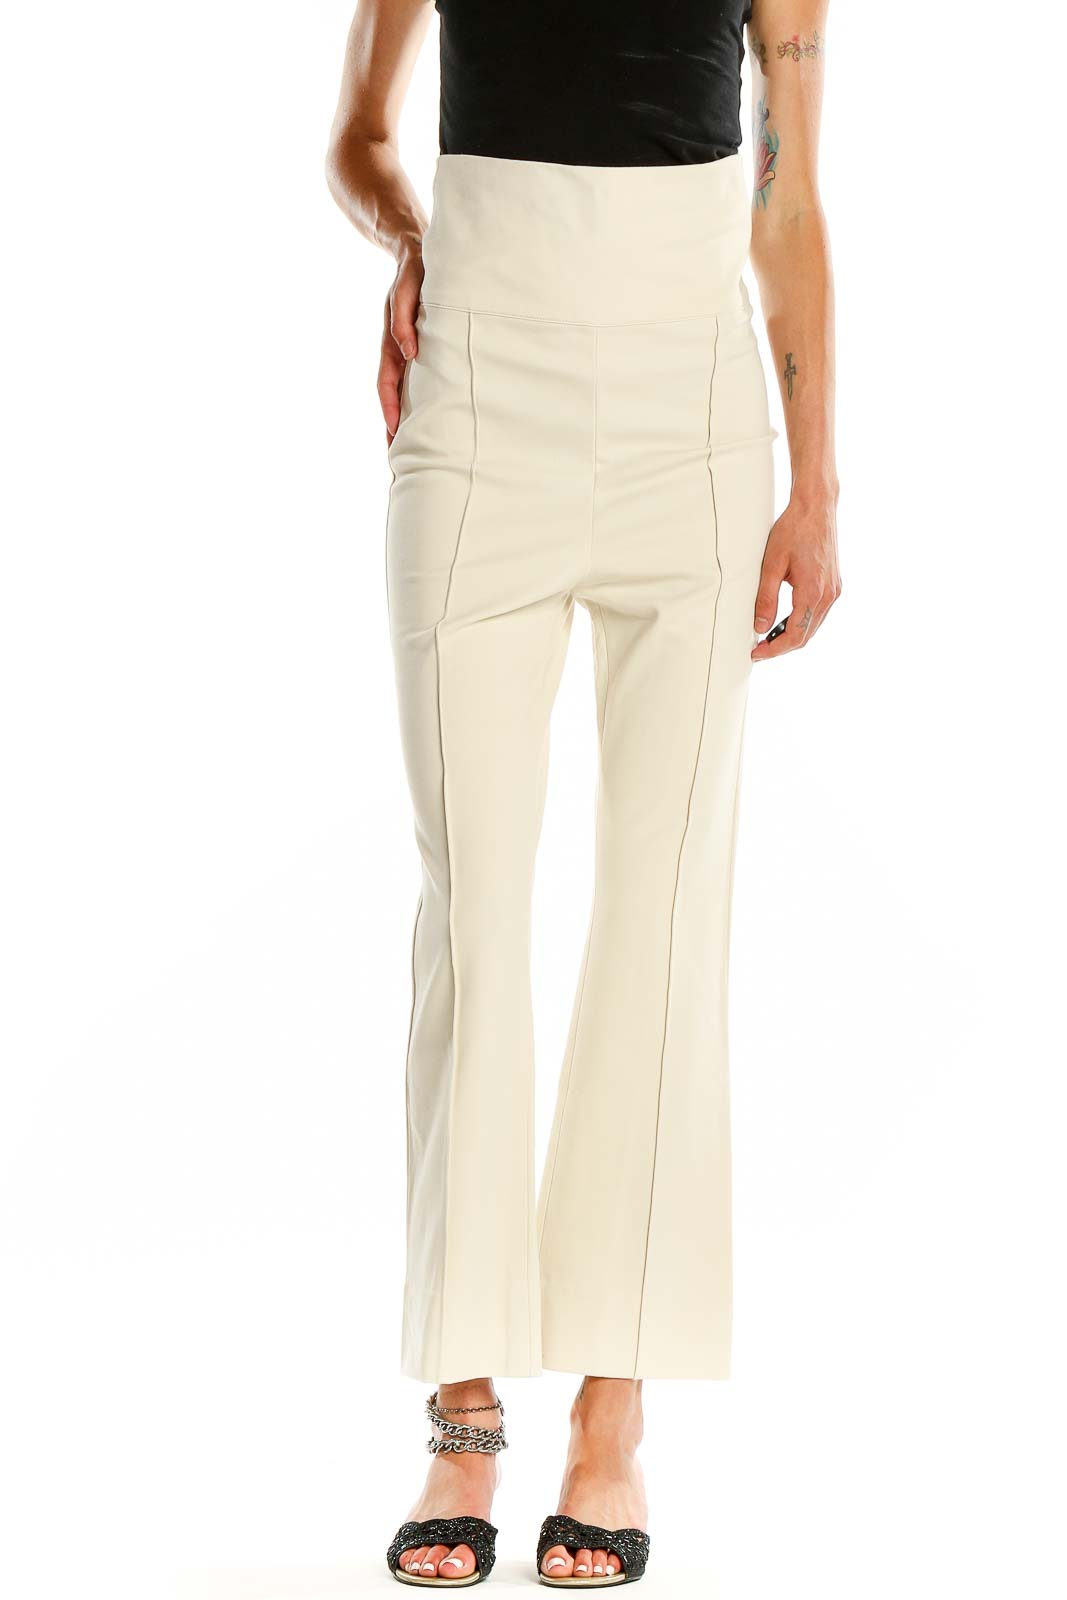 Cream High Waisted Flare Pants Front